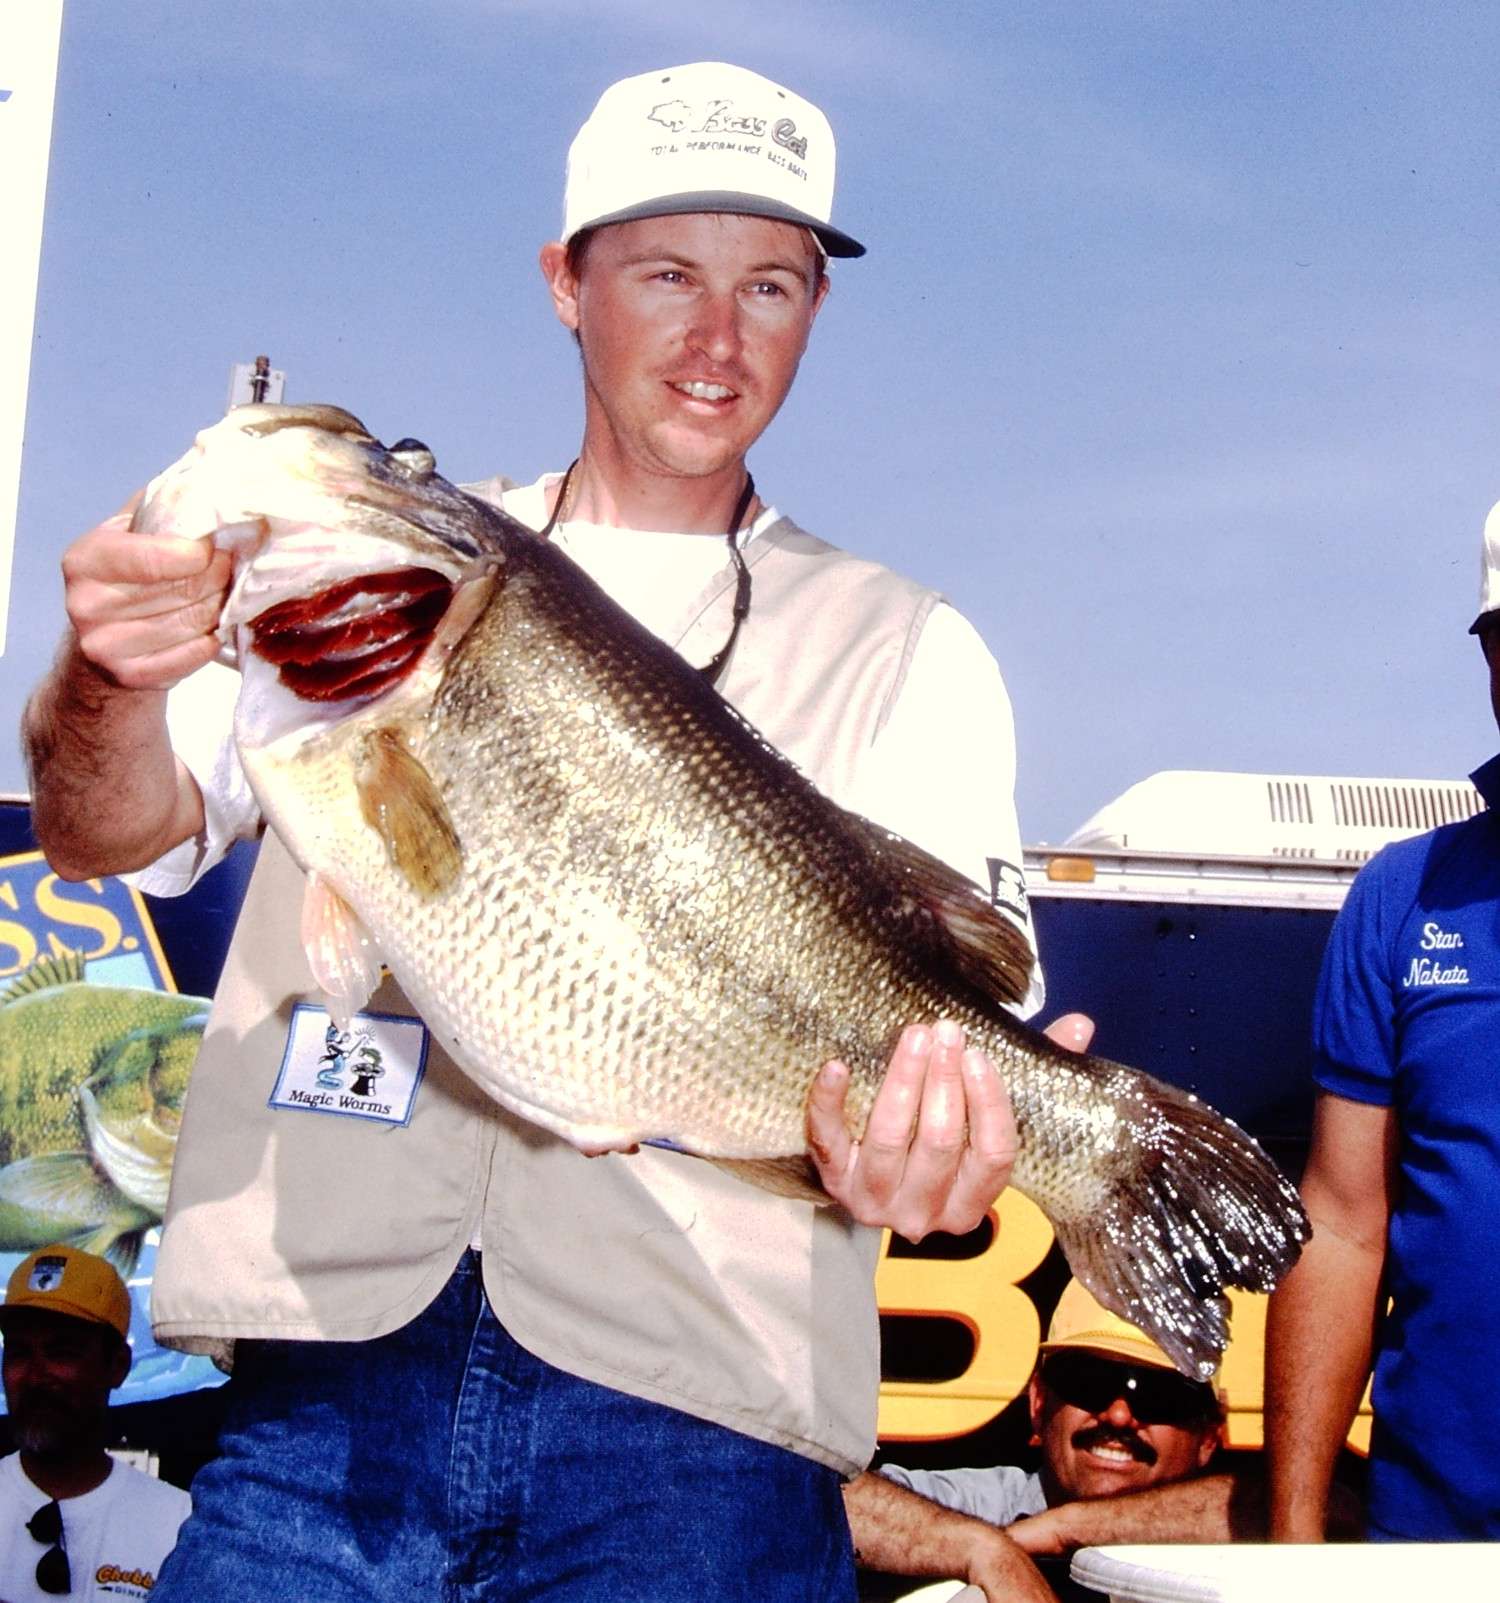 Biggest Bass: Mark Tyler, 14-9
If you're going to have a record, this is a great one to have. Mark Tyler pulled a 14-pound, 9-ounce behemoth out of the California Delta in April 1999. It was the biggest ever caught in a B.A.S.S. event. He ended in fourth place with 60-4 over three days.